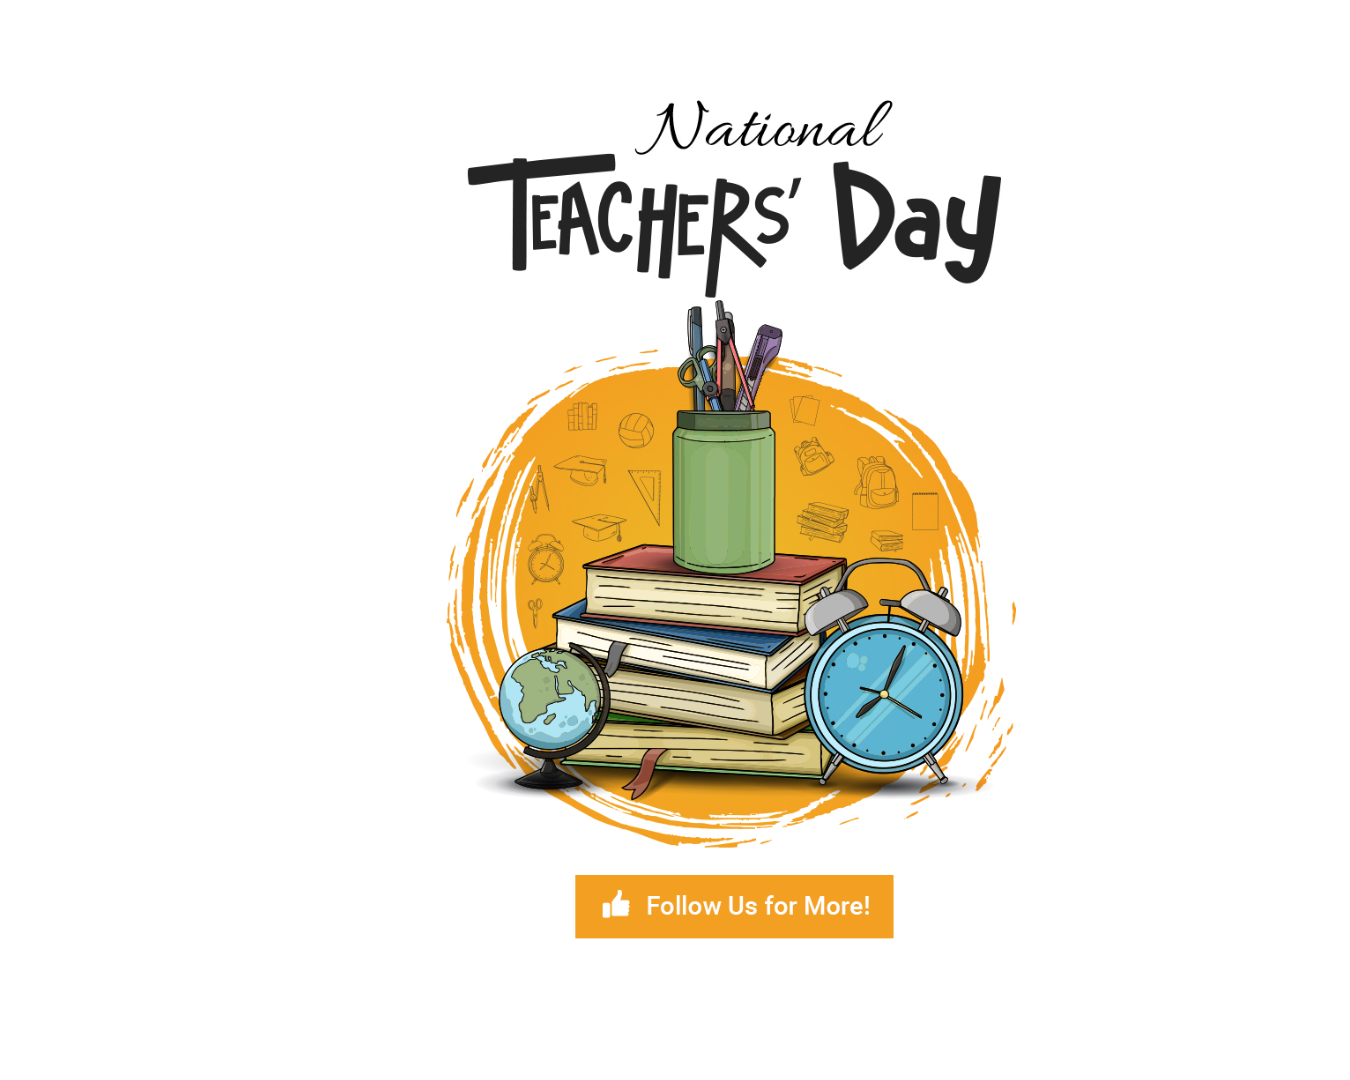 Its the National Teachers Day holiday today! West Orlando Internal